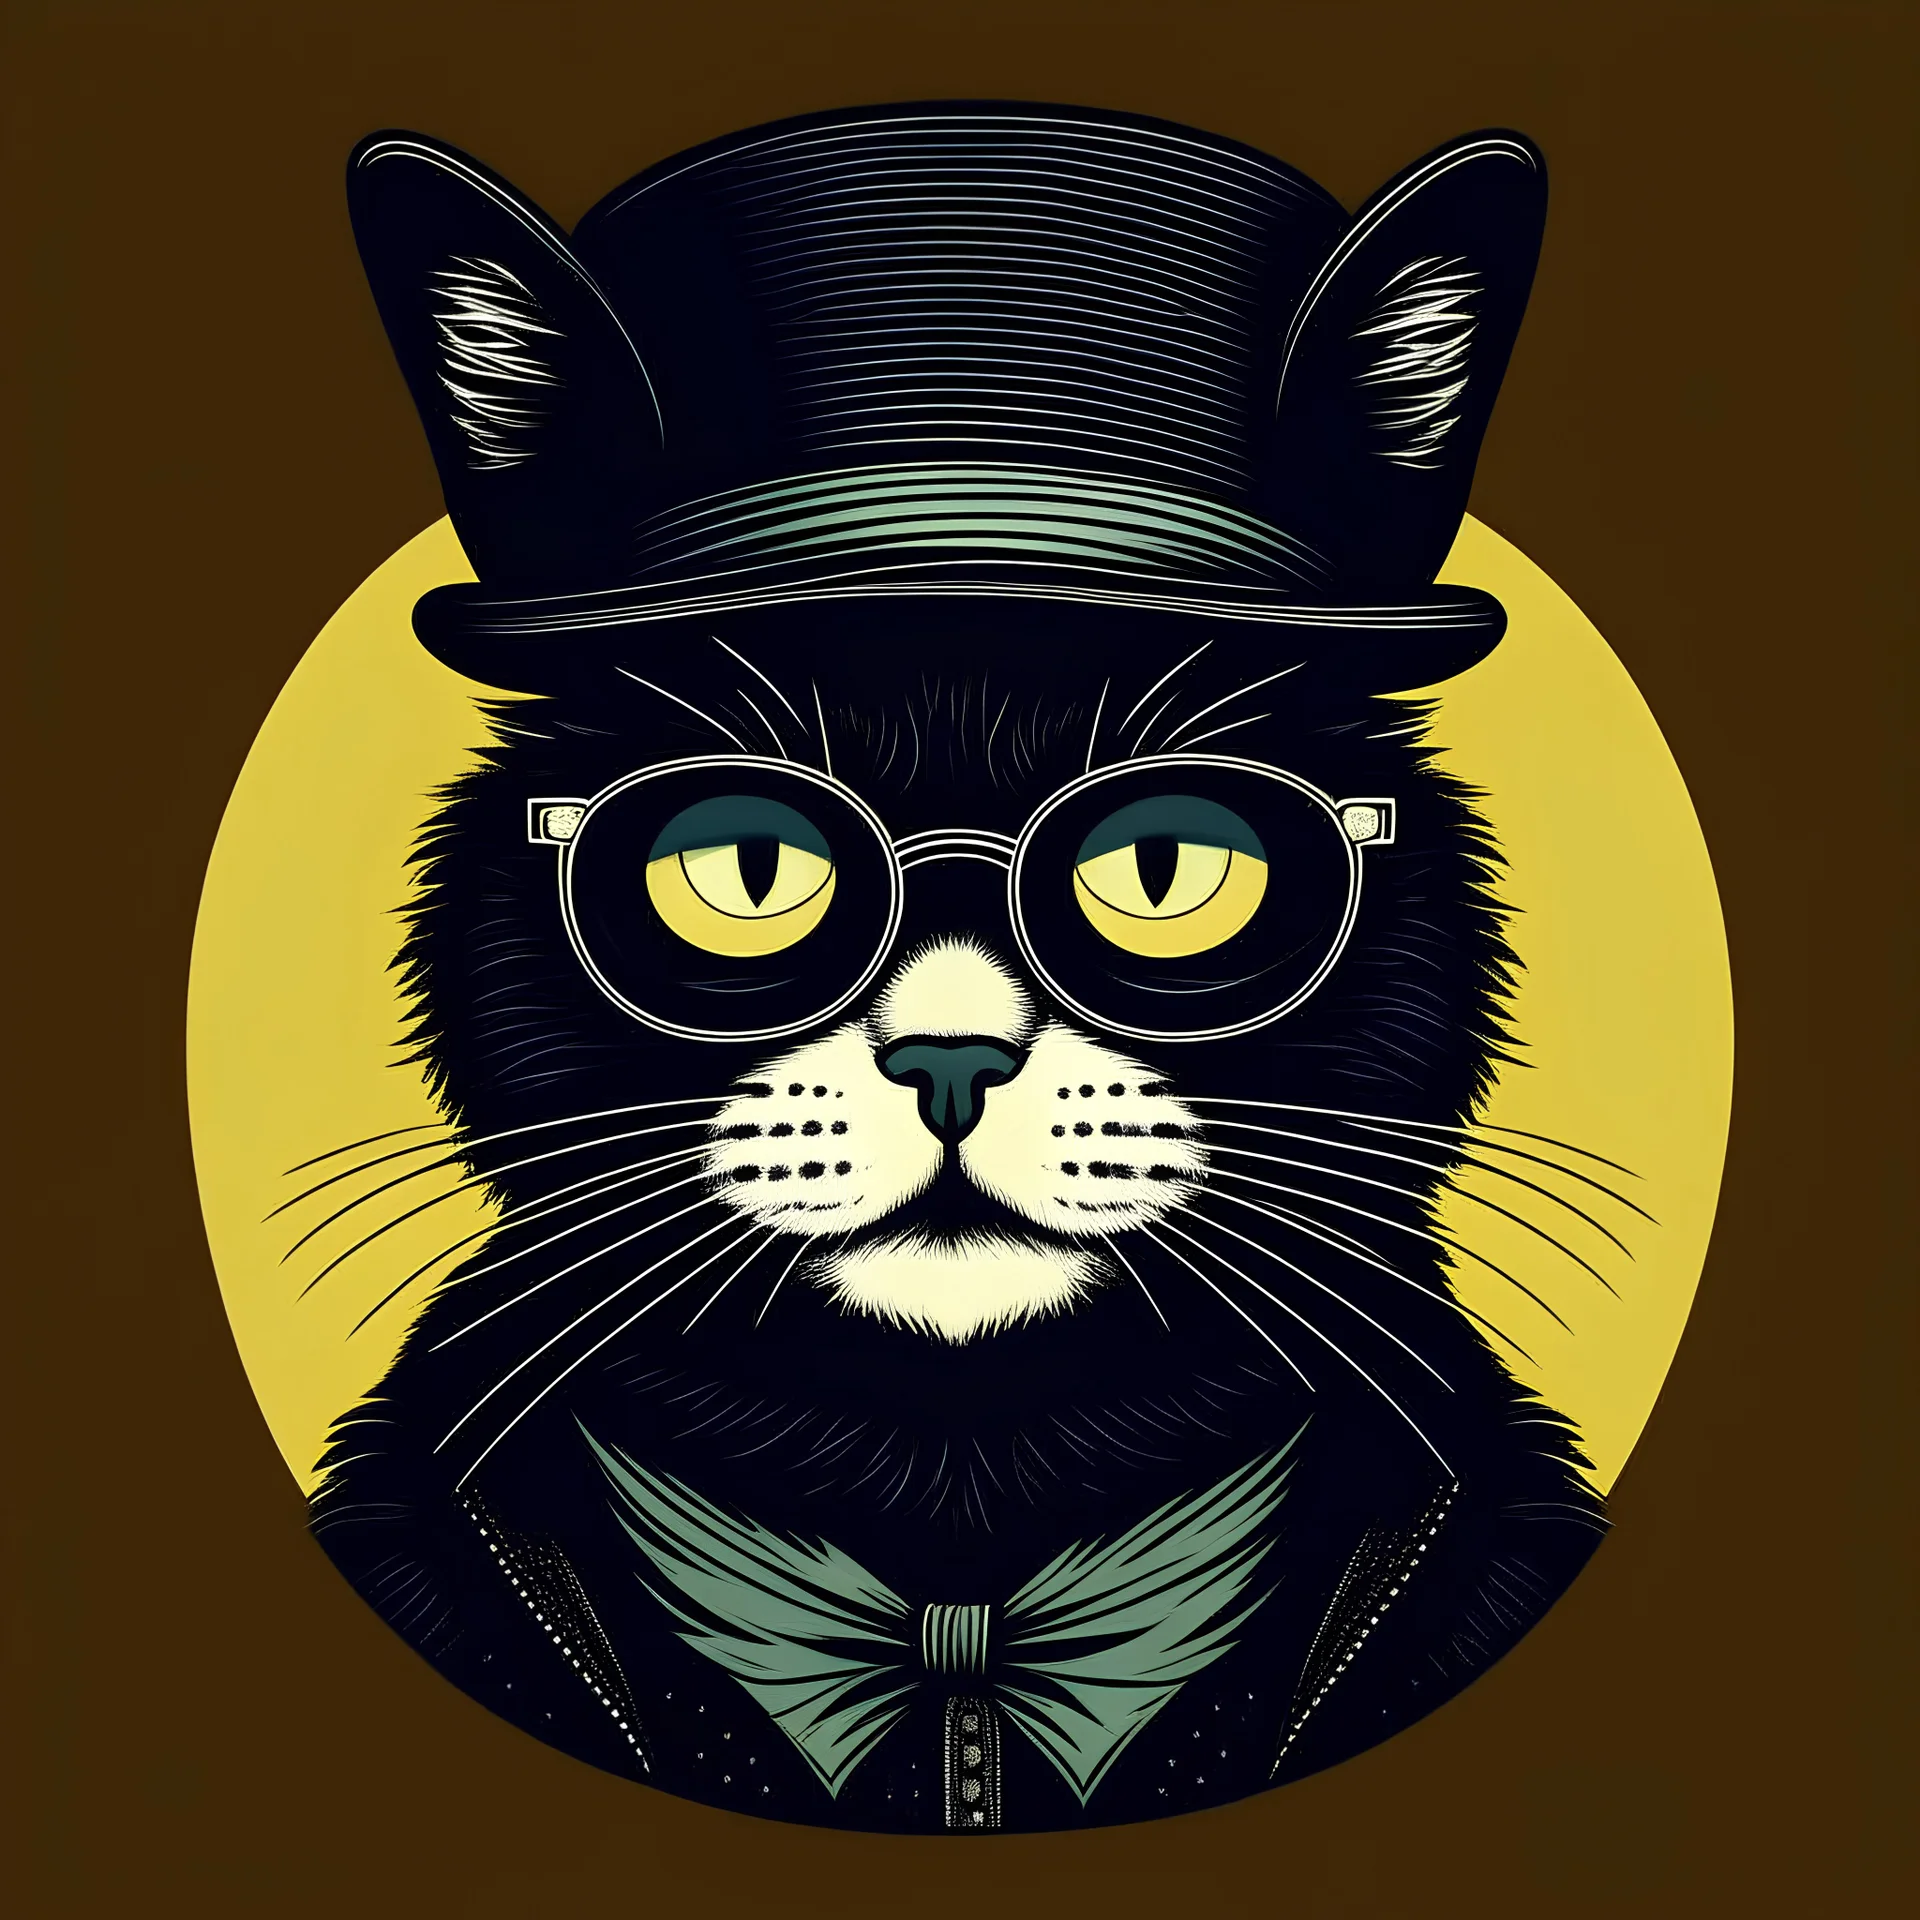 Drawing of a surprised cat with black jacket, hat and glasses, NFT style